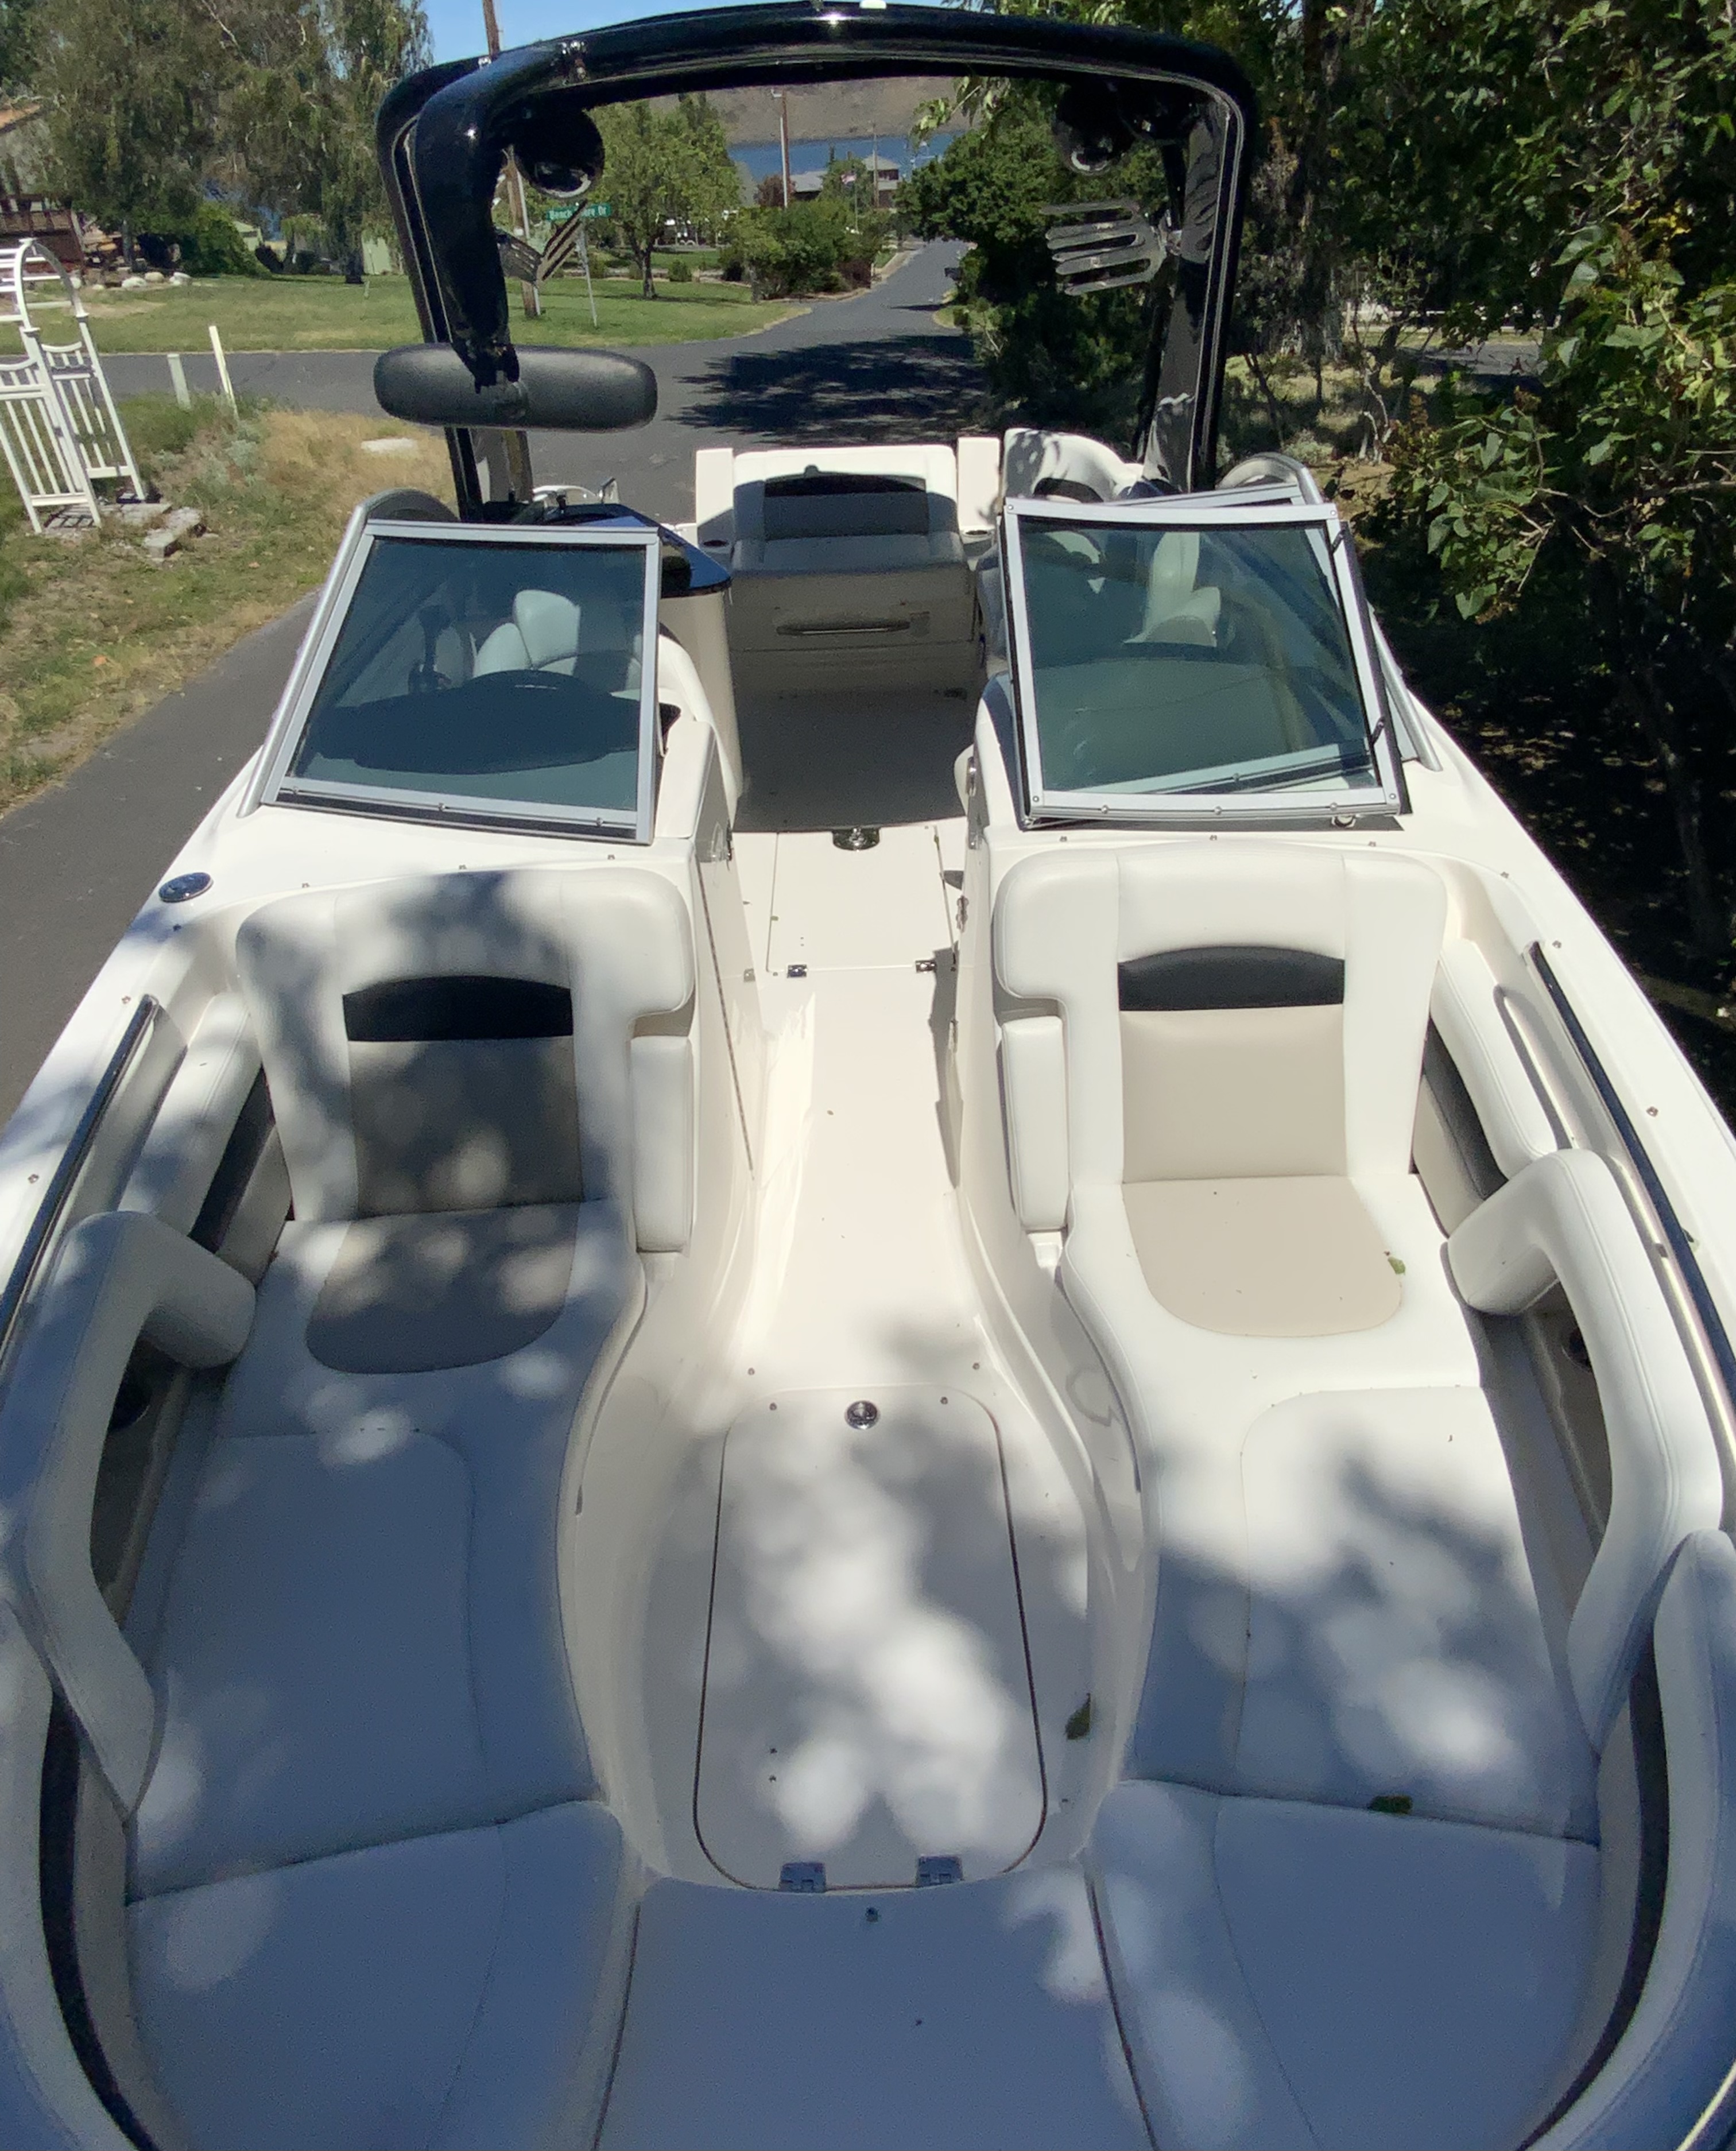 2008 Chaparral 264 Sunesta Power boat for sale in Hermiston, OR - image 4 